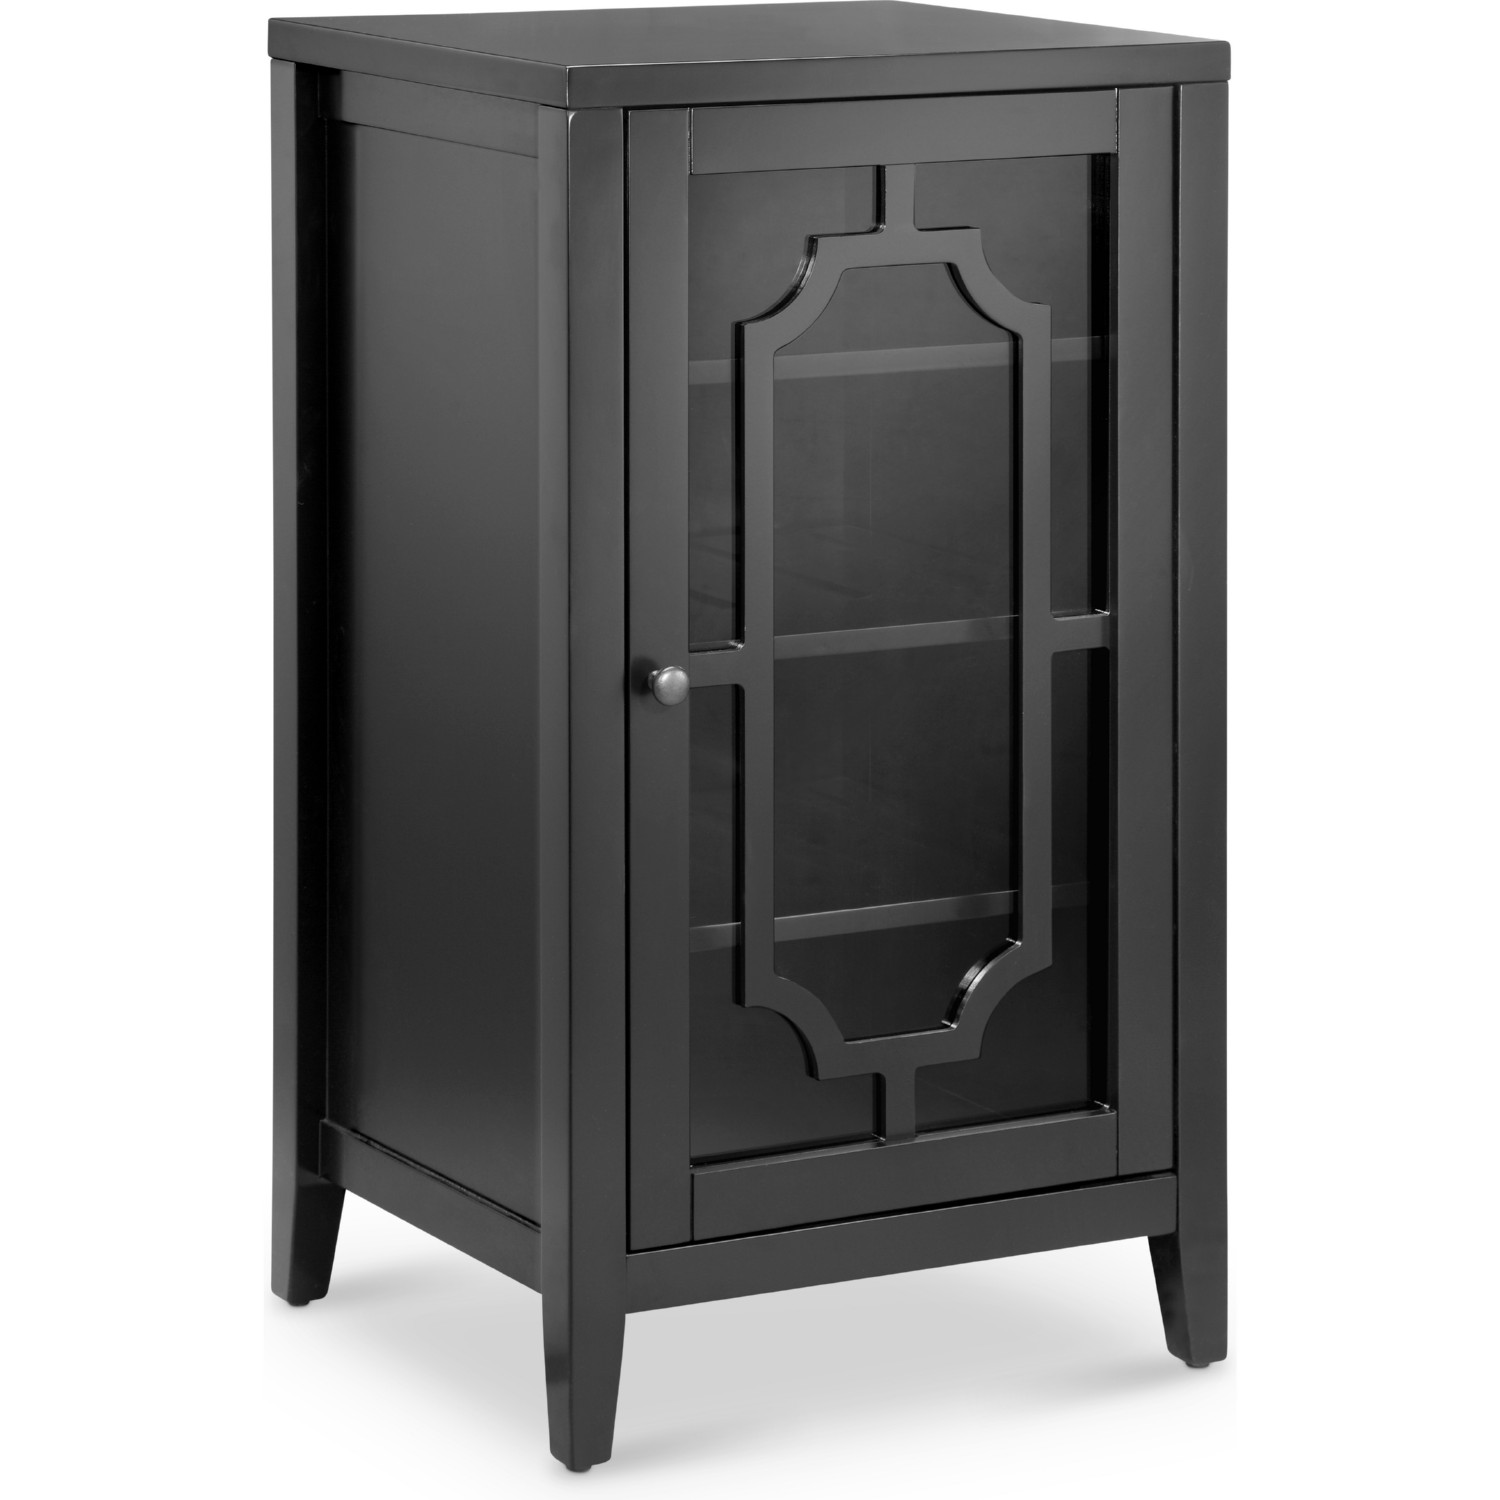 18" X 16" X 33" Black Accent And Wine Cabinet